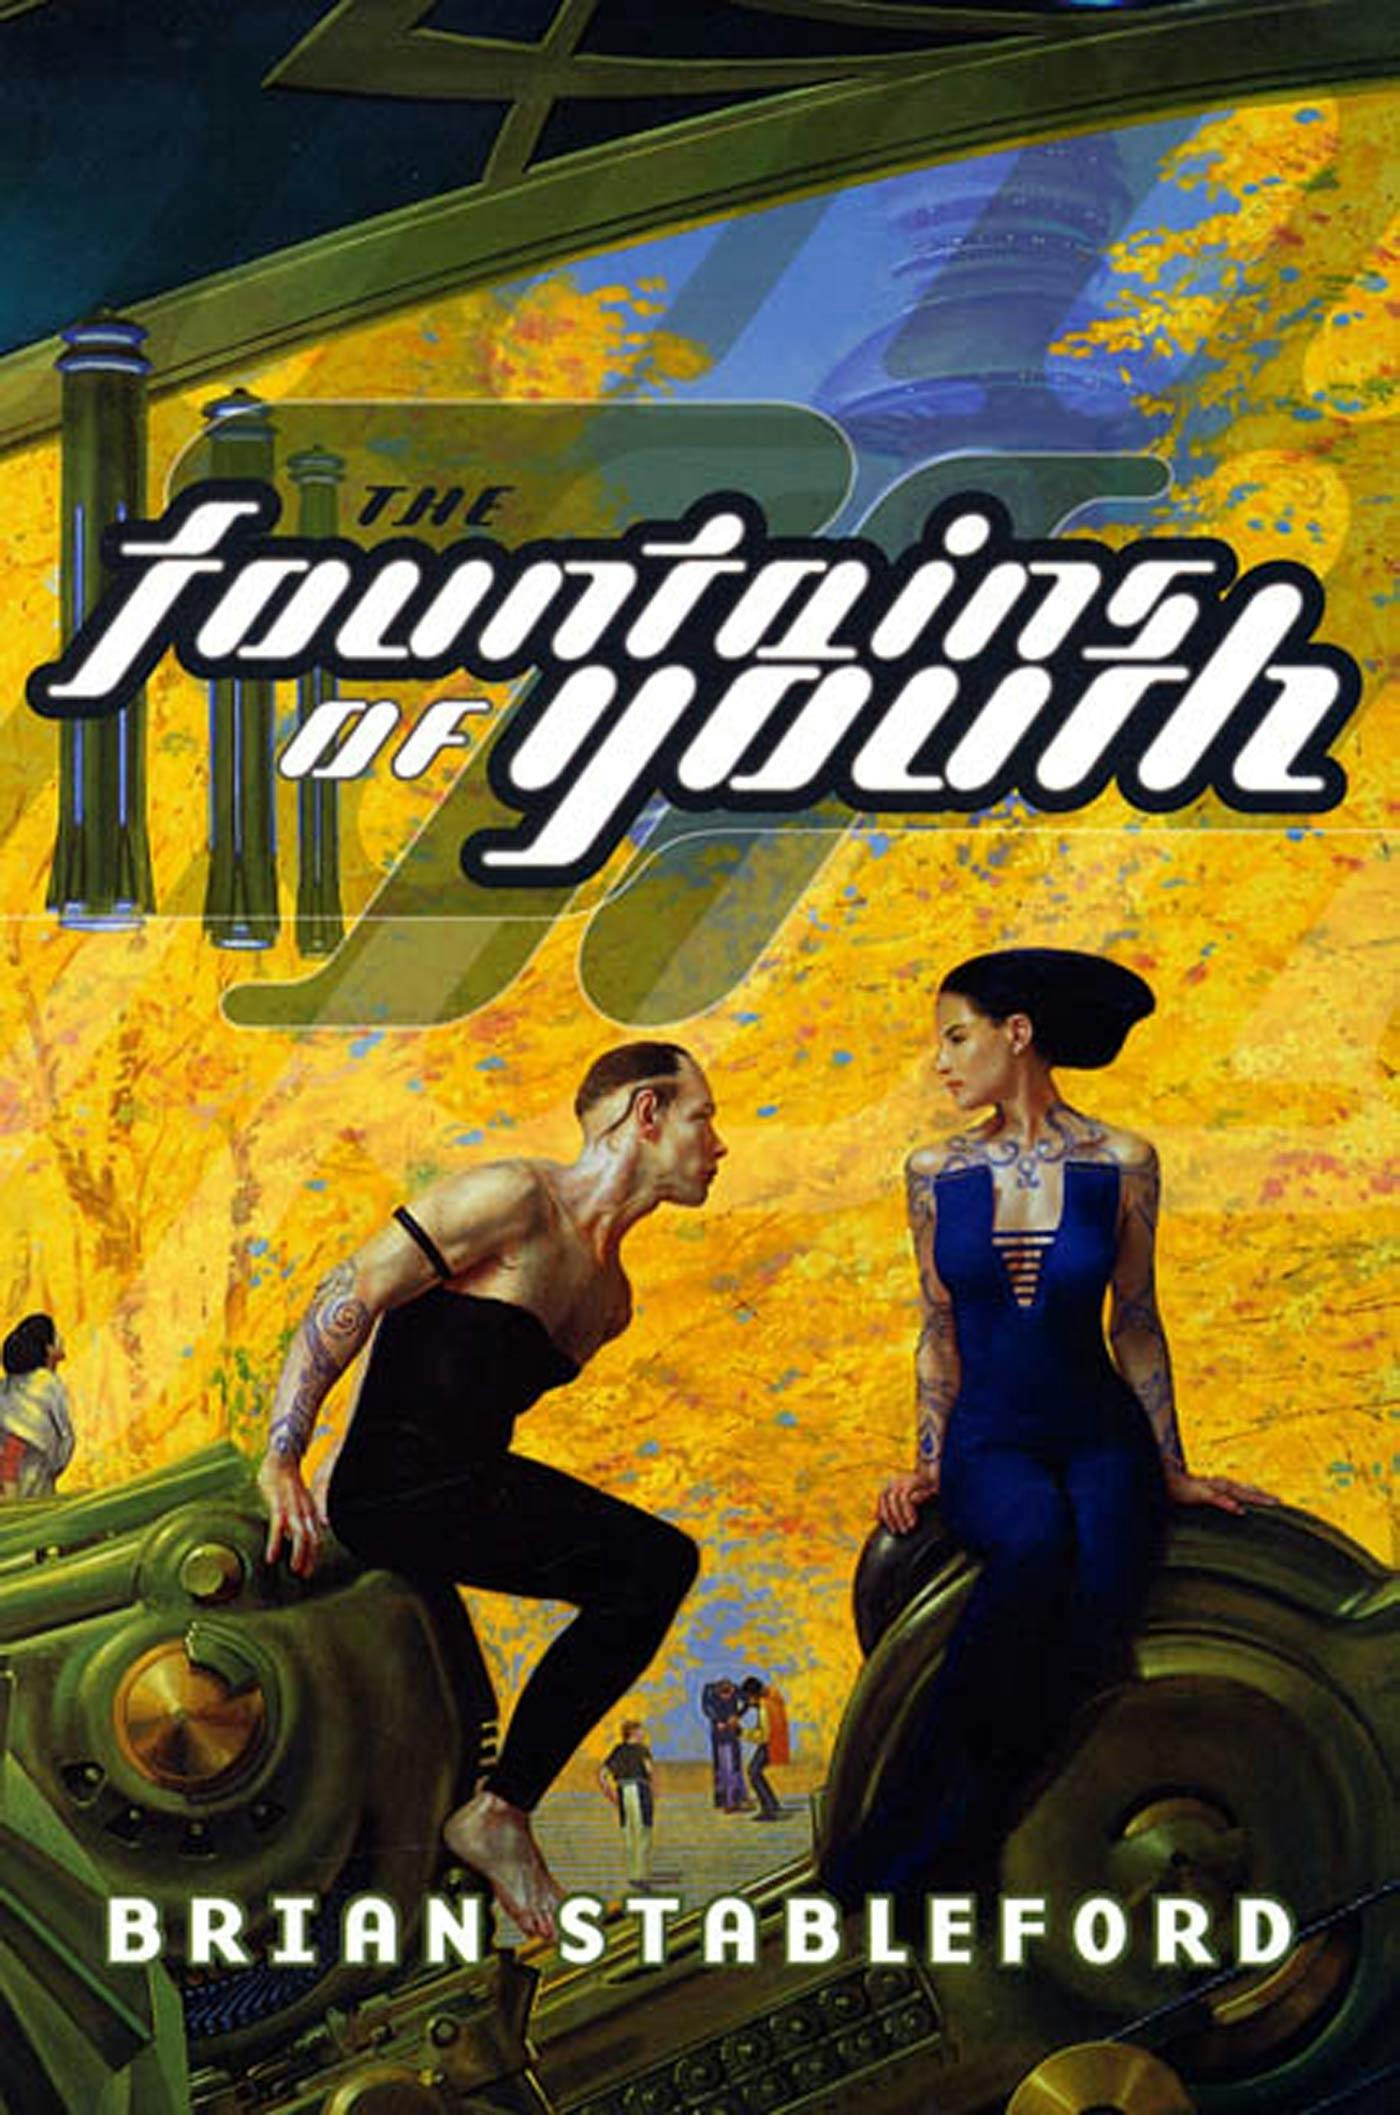 Cover for the book titled as: The Fountains of Youth